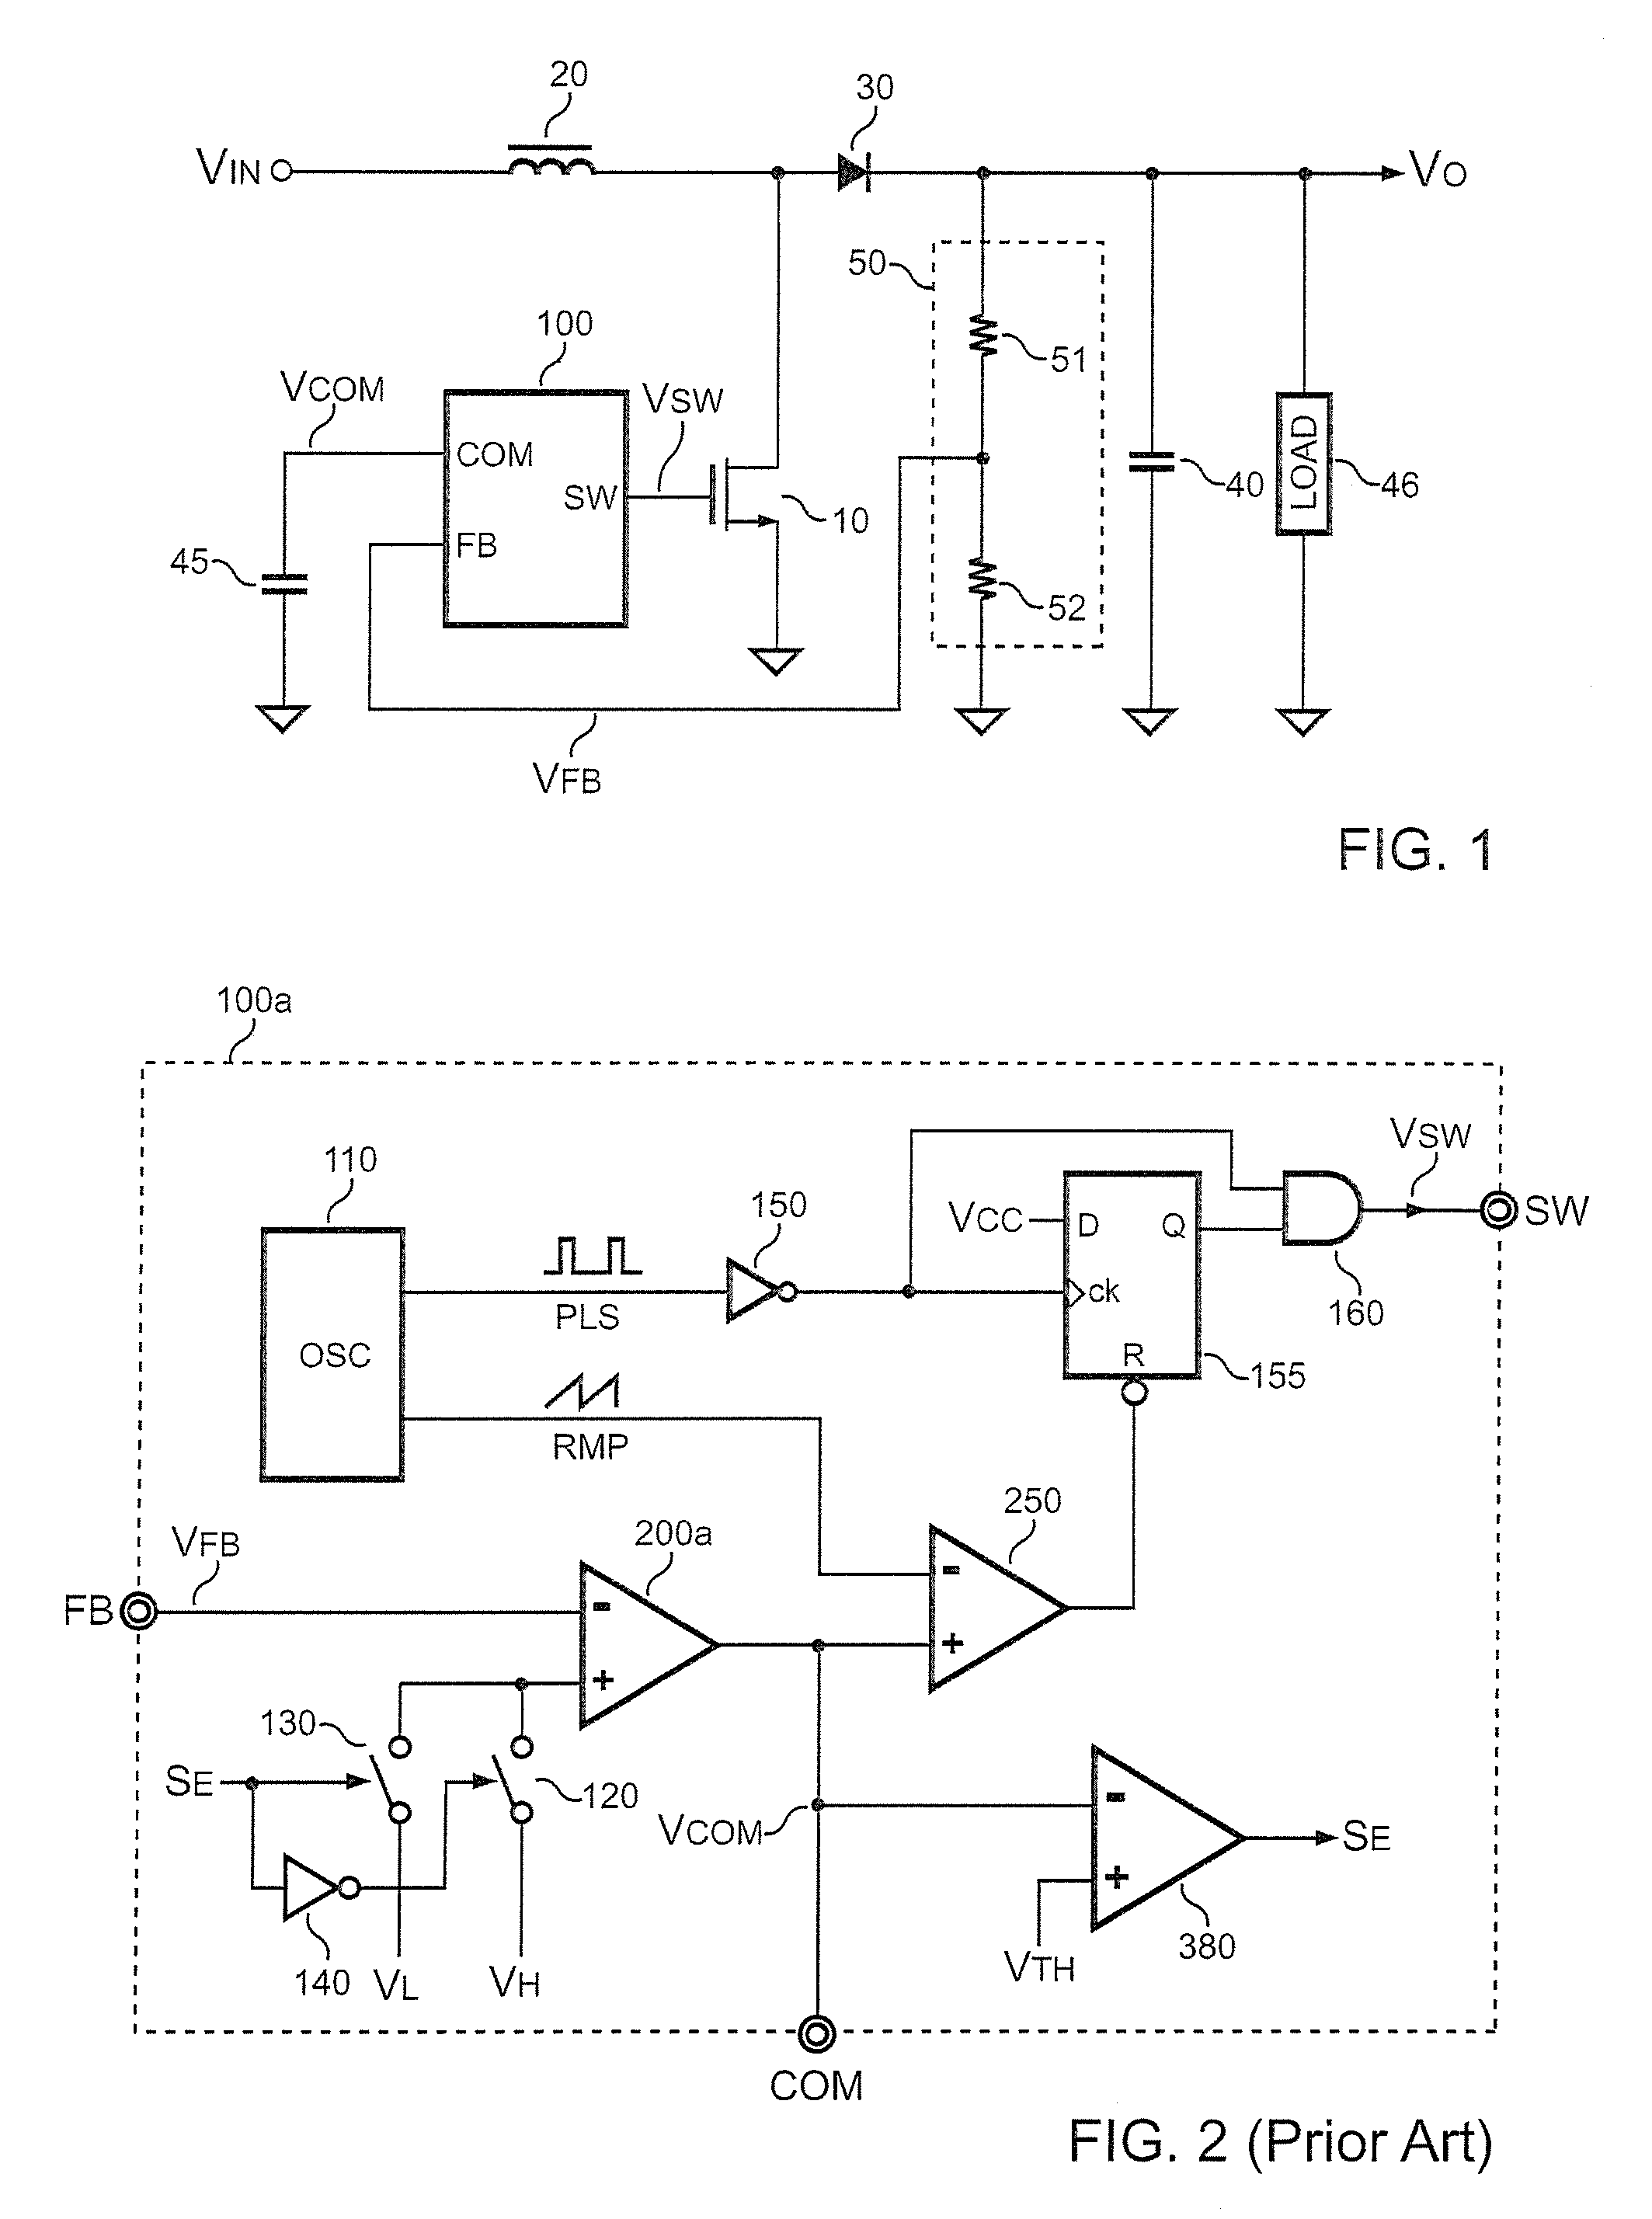 Switching controller having programmable feedback circuit for power converters